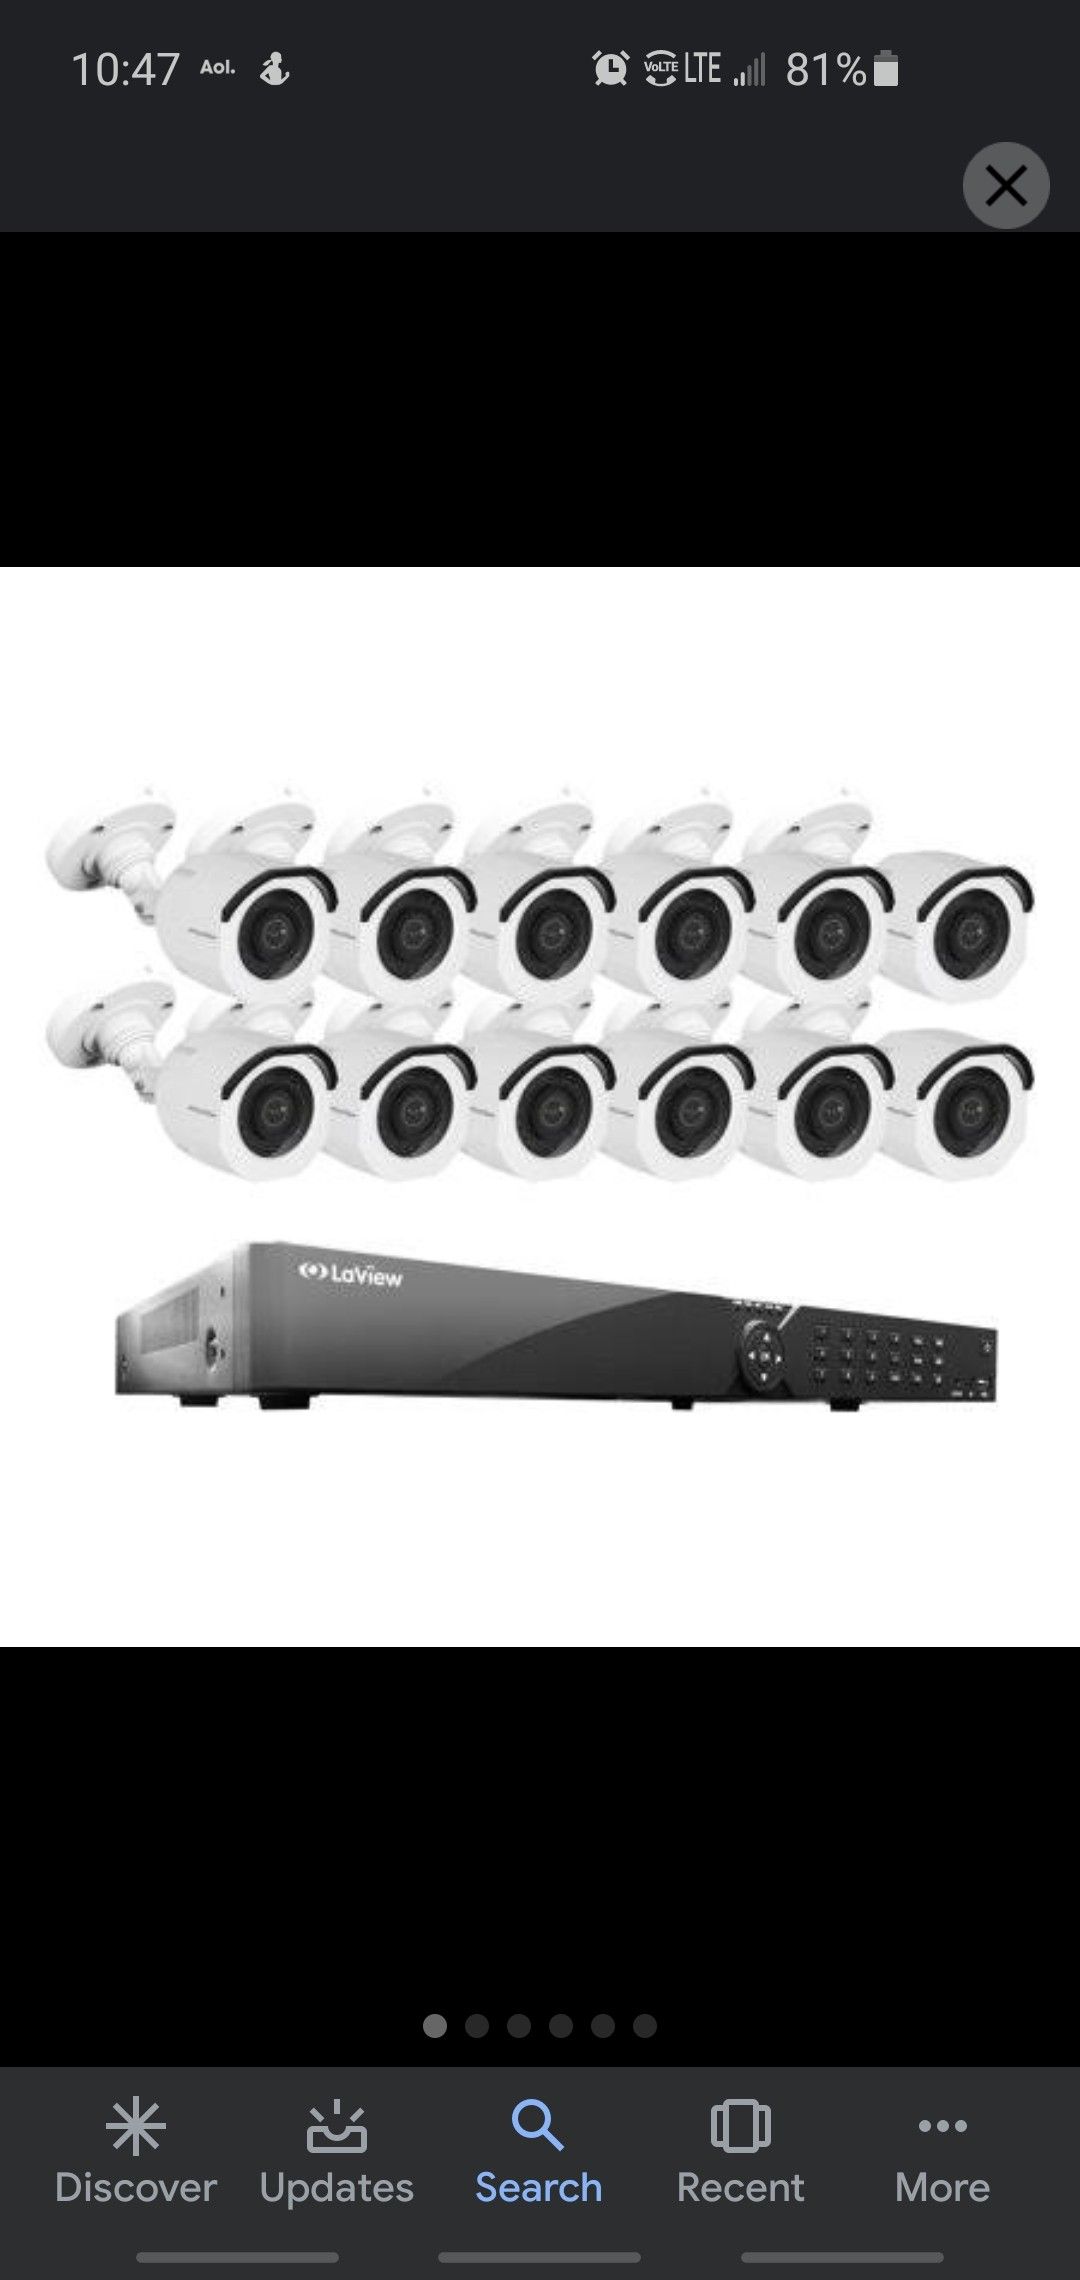 LaView 12 chanel security camera system